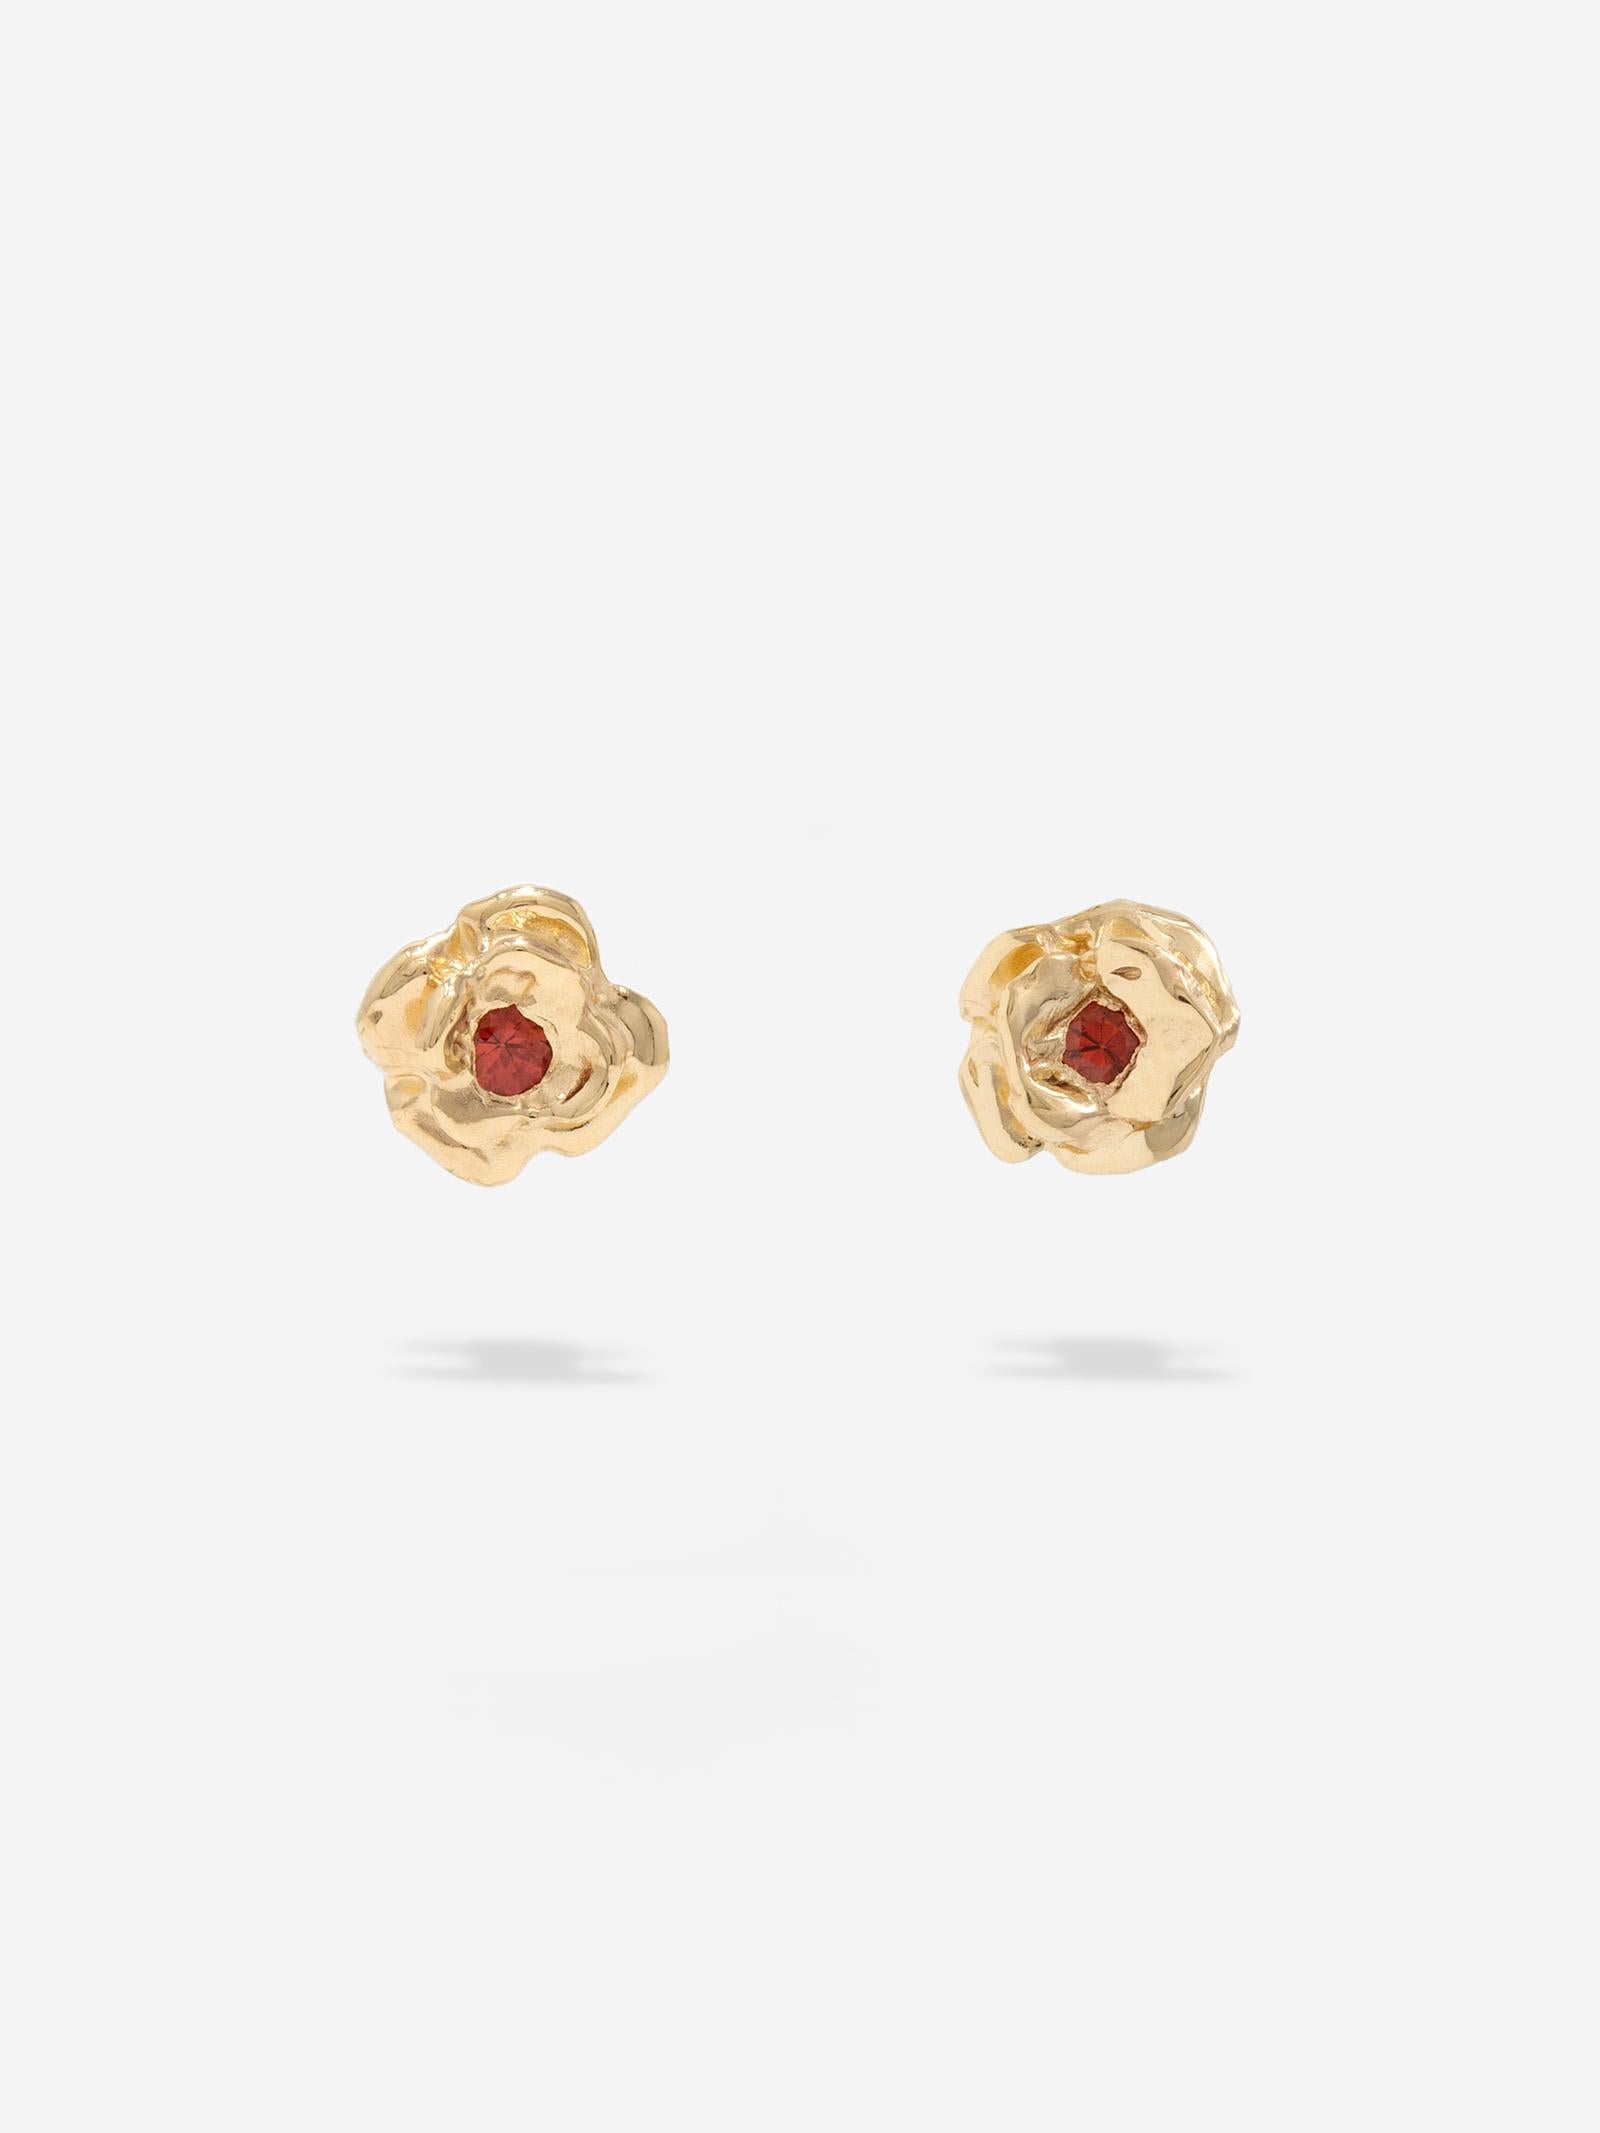 Round Cut 10K Rose Earrings with Sapphires